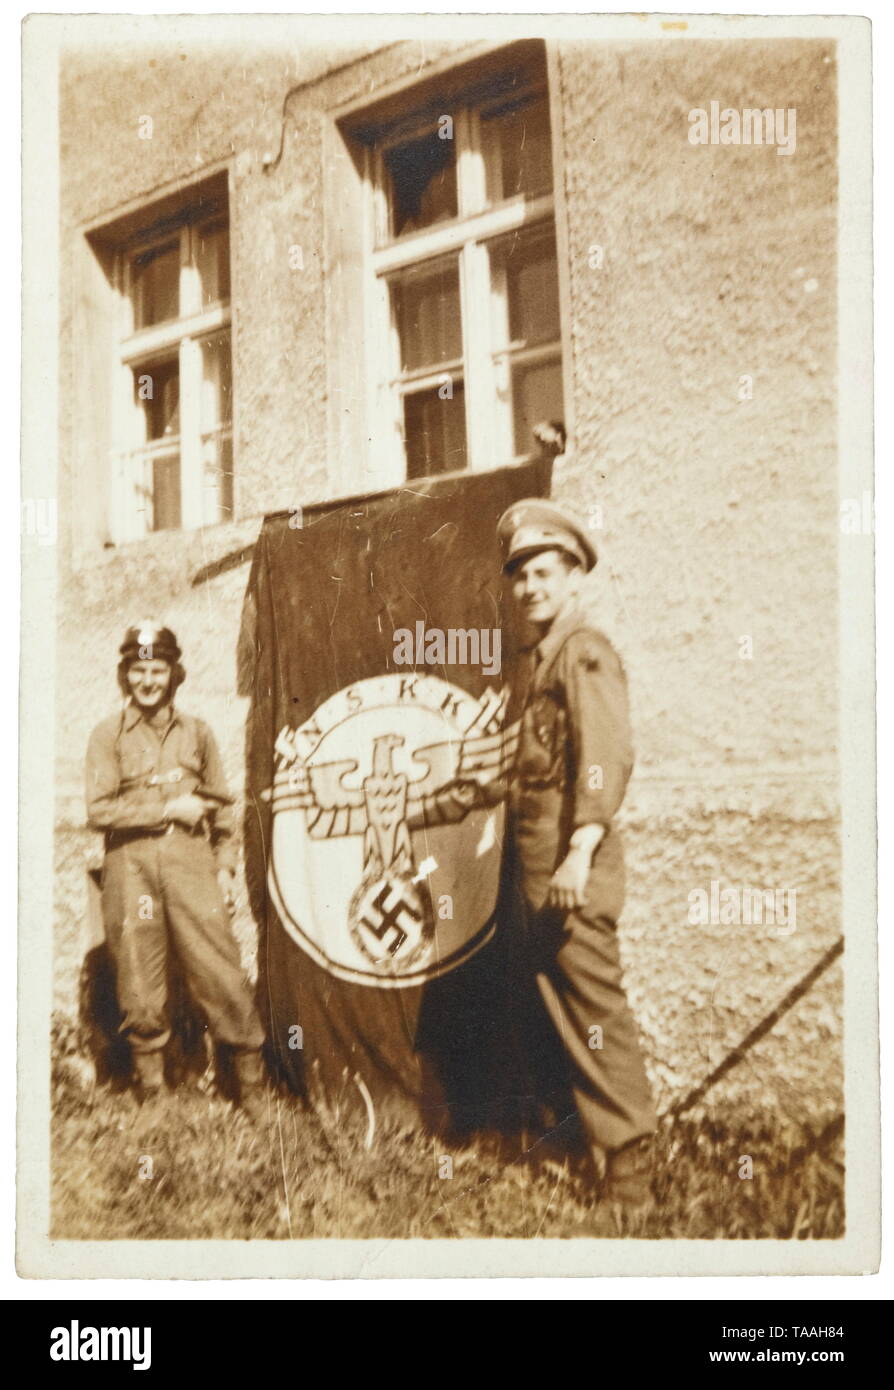 A large flag of the NSKK (National Socialist Automotive Division) Red cotton flag cloth, both faces display a multi-coloured symbol with national eagle and 'N.S.K.K.' in the centre. Reinforced corners, with flaws and holes. Dimensions 5 x 2 m. Comes with a photograph of two U.S. soldiers with captured NSKK flag. historic, historical, organisation, organization, organizations, organisations, 20th century, Additional-Rights-Clearance-Info-Not-Available Stock Photo